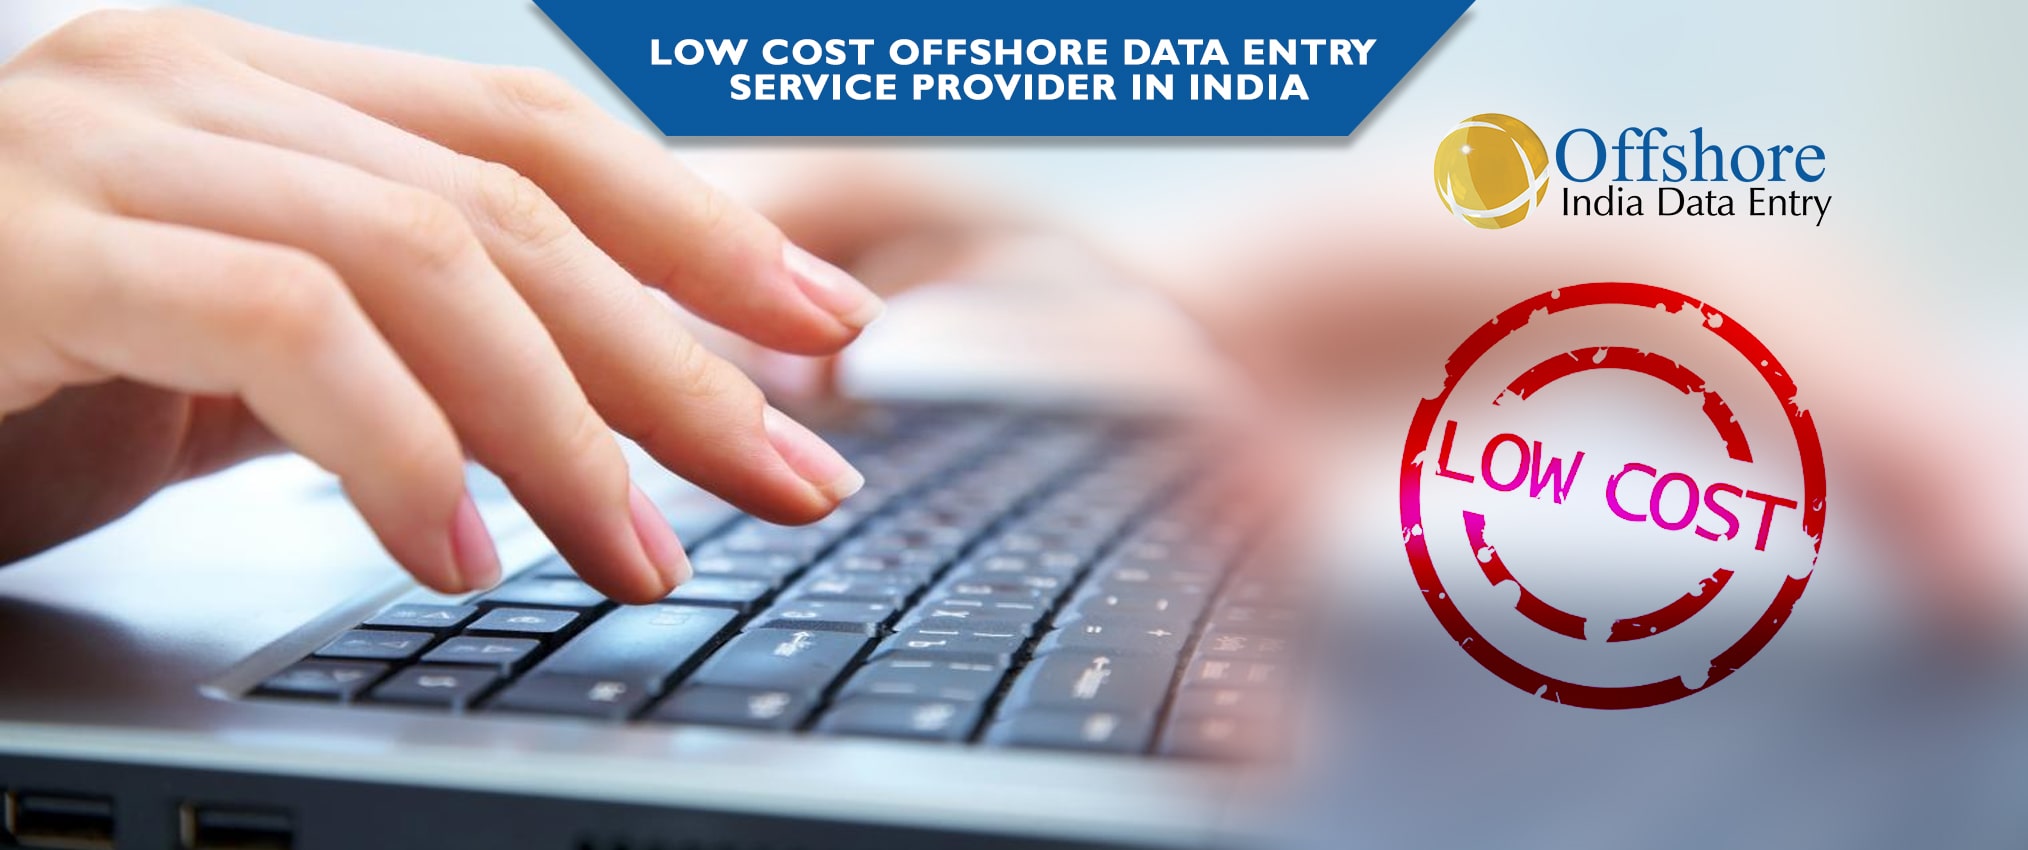 offshore-data-entry-service-provider-india